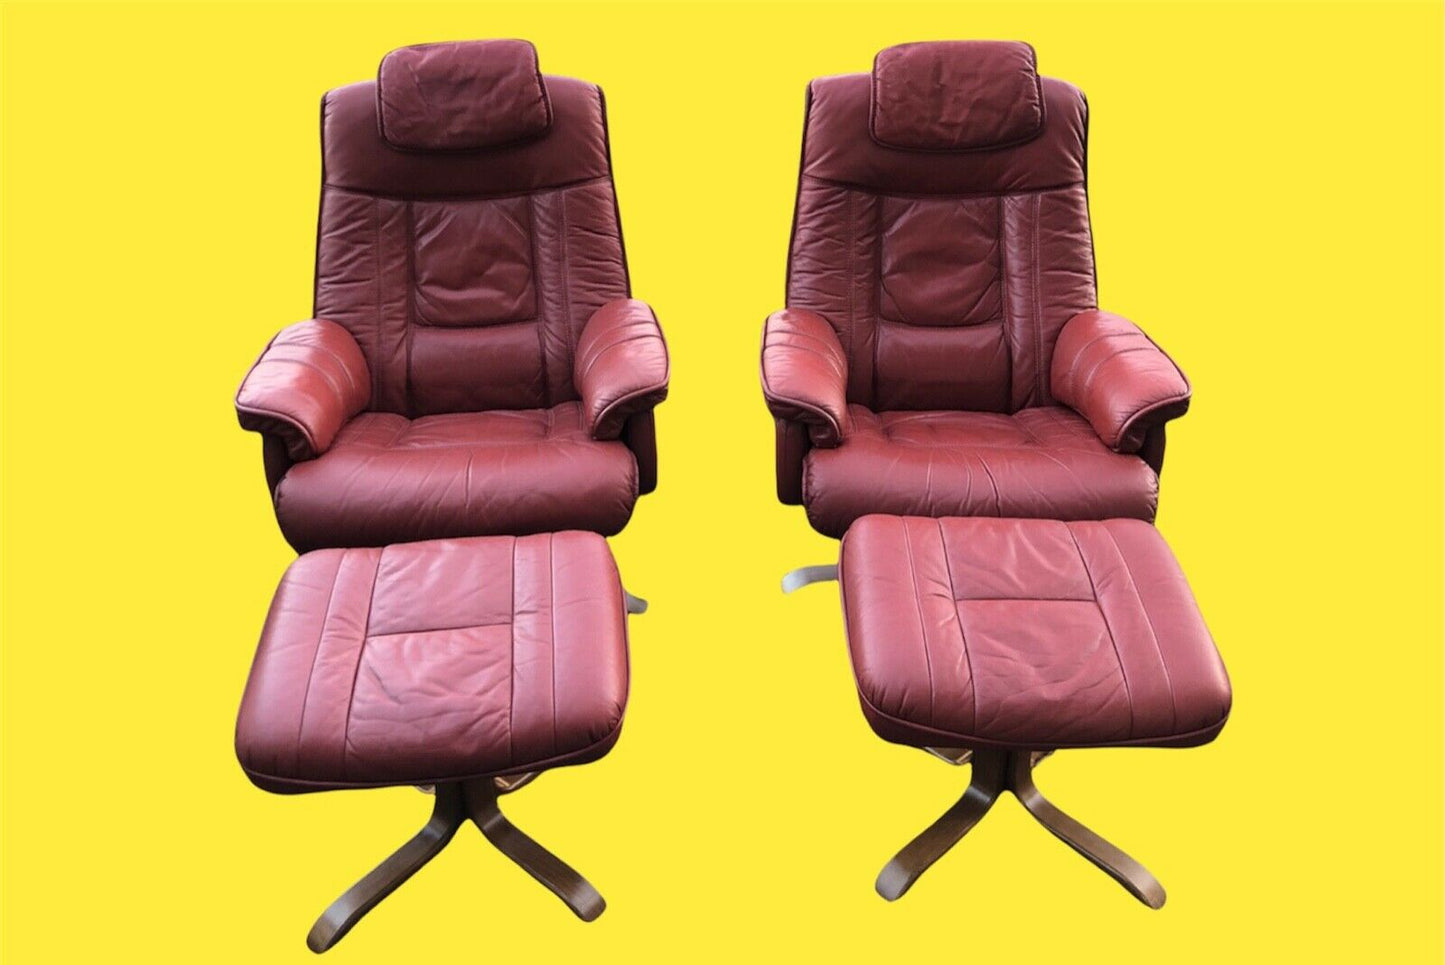 Stunning Pair Of Red Leather Reclining Armchairs With Matching Stools ( SOLD )